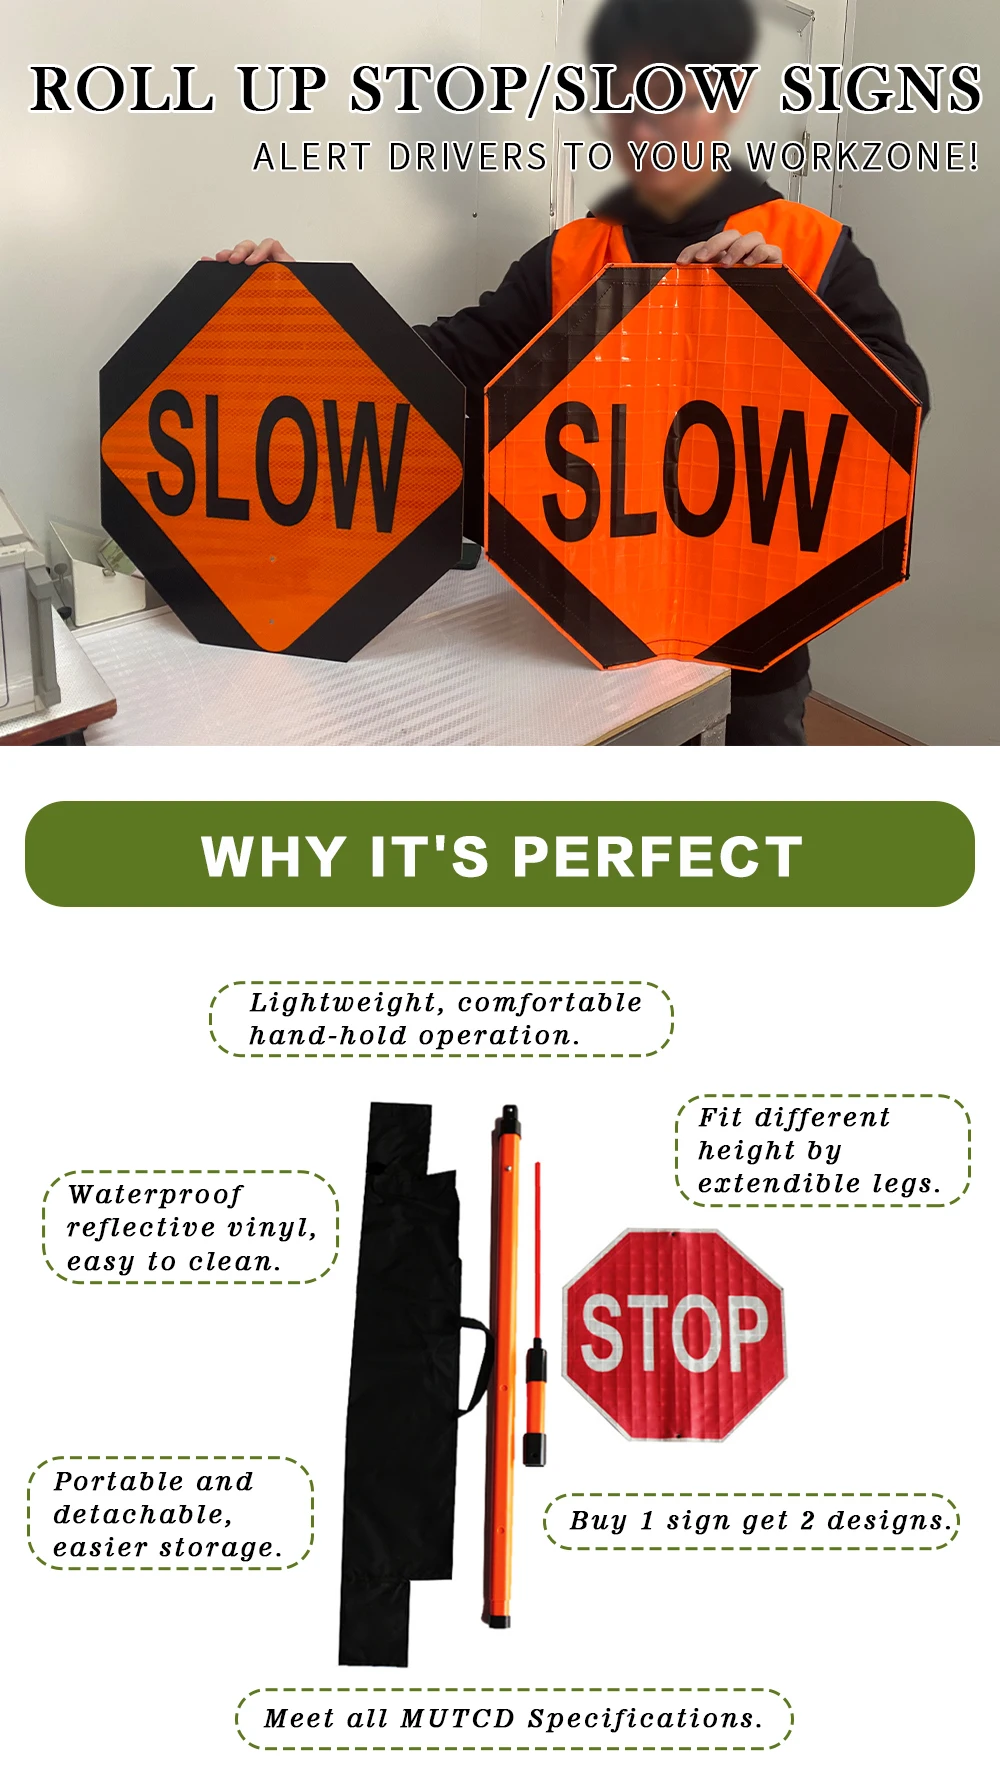 Roll-Up Stop/Slow Signs